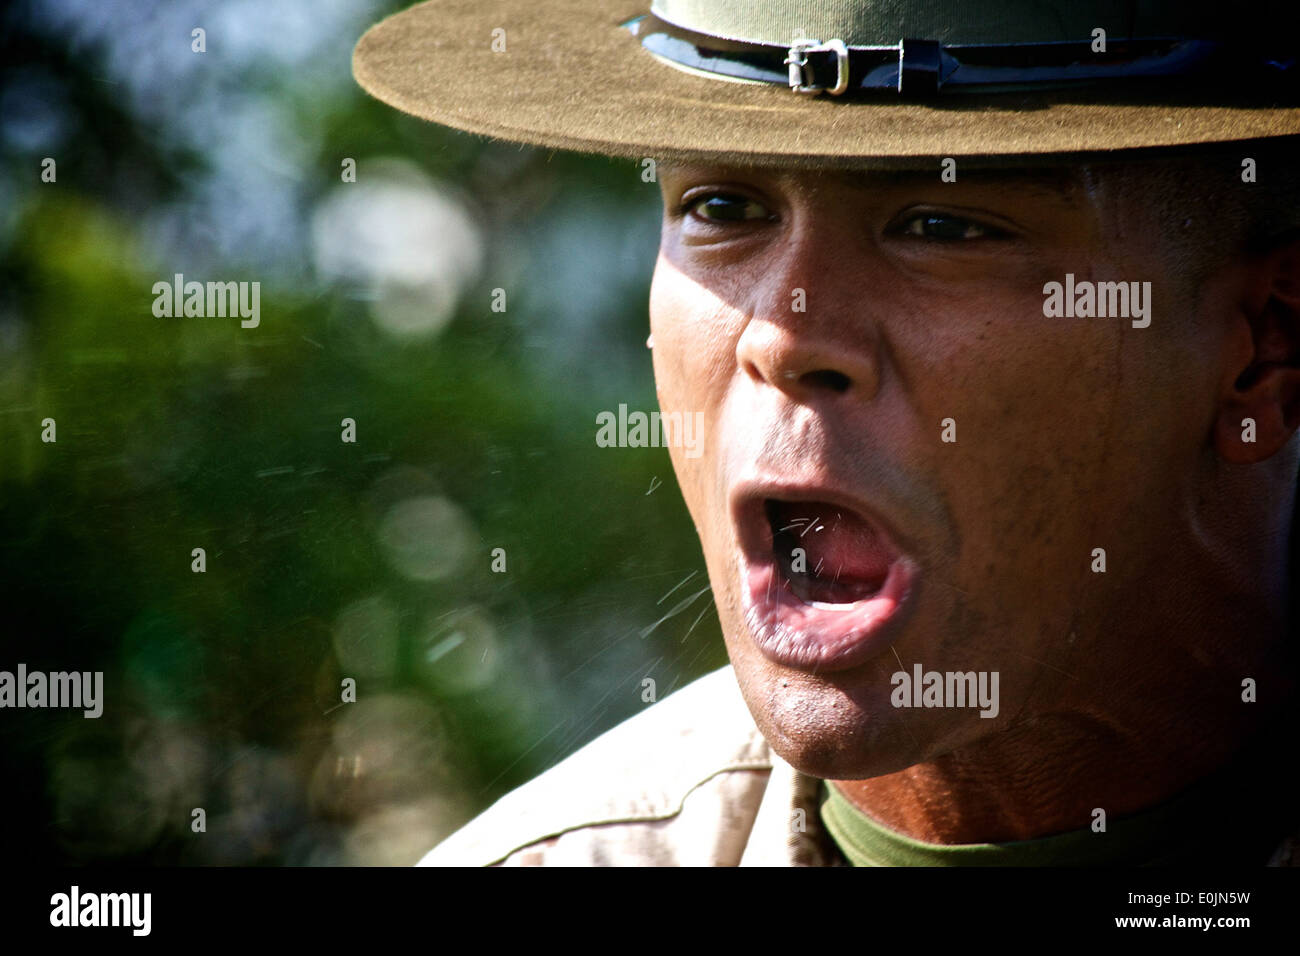 ... Recruiting Station Fort Lauderdale corrects a future <b>Marine during</b> the - a-drill-instructor-from-marine-corps-recruiting-station-fort-lauderdale-E0JN5W